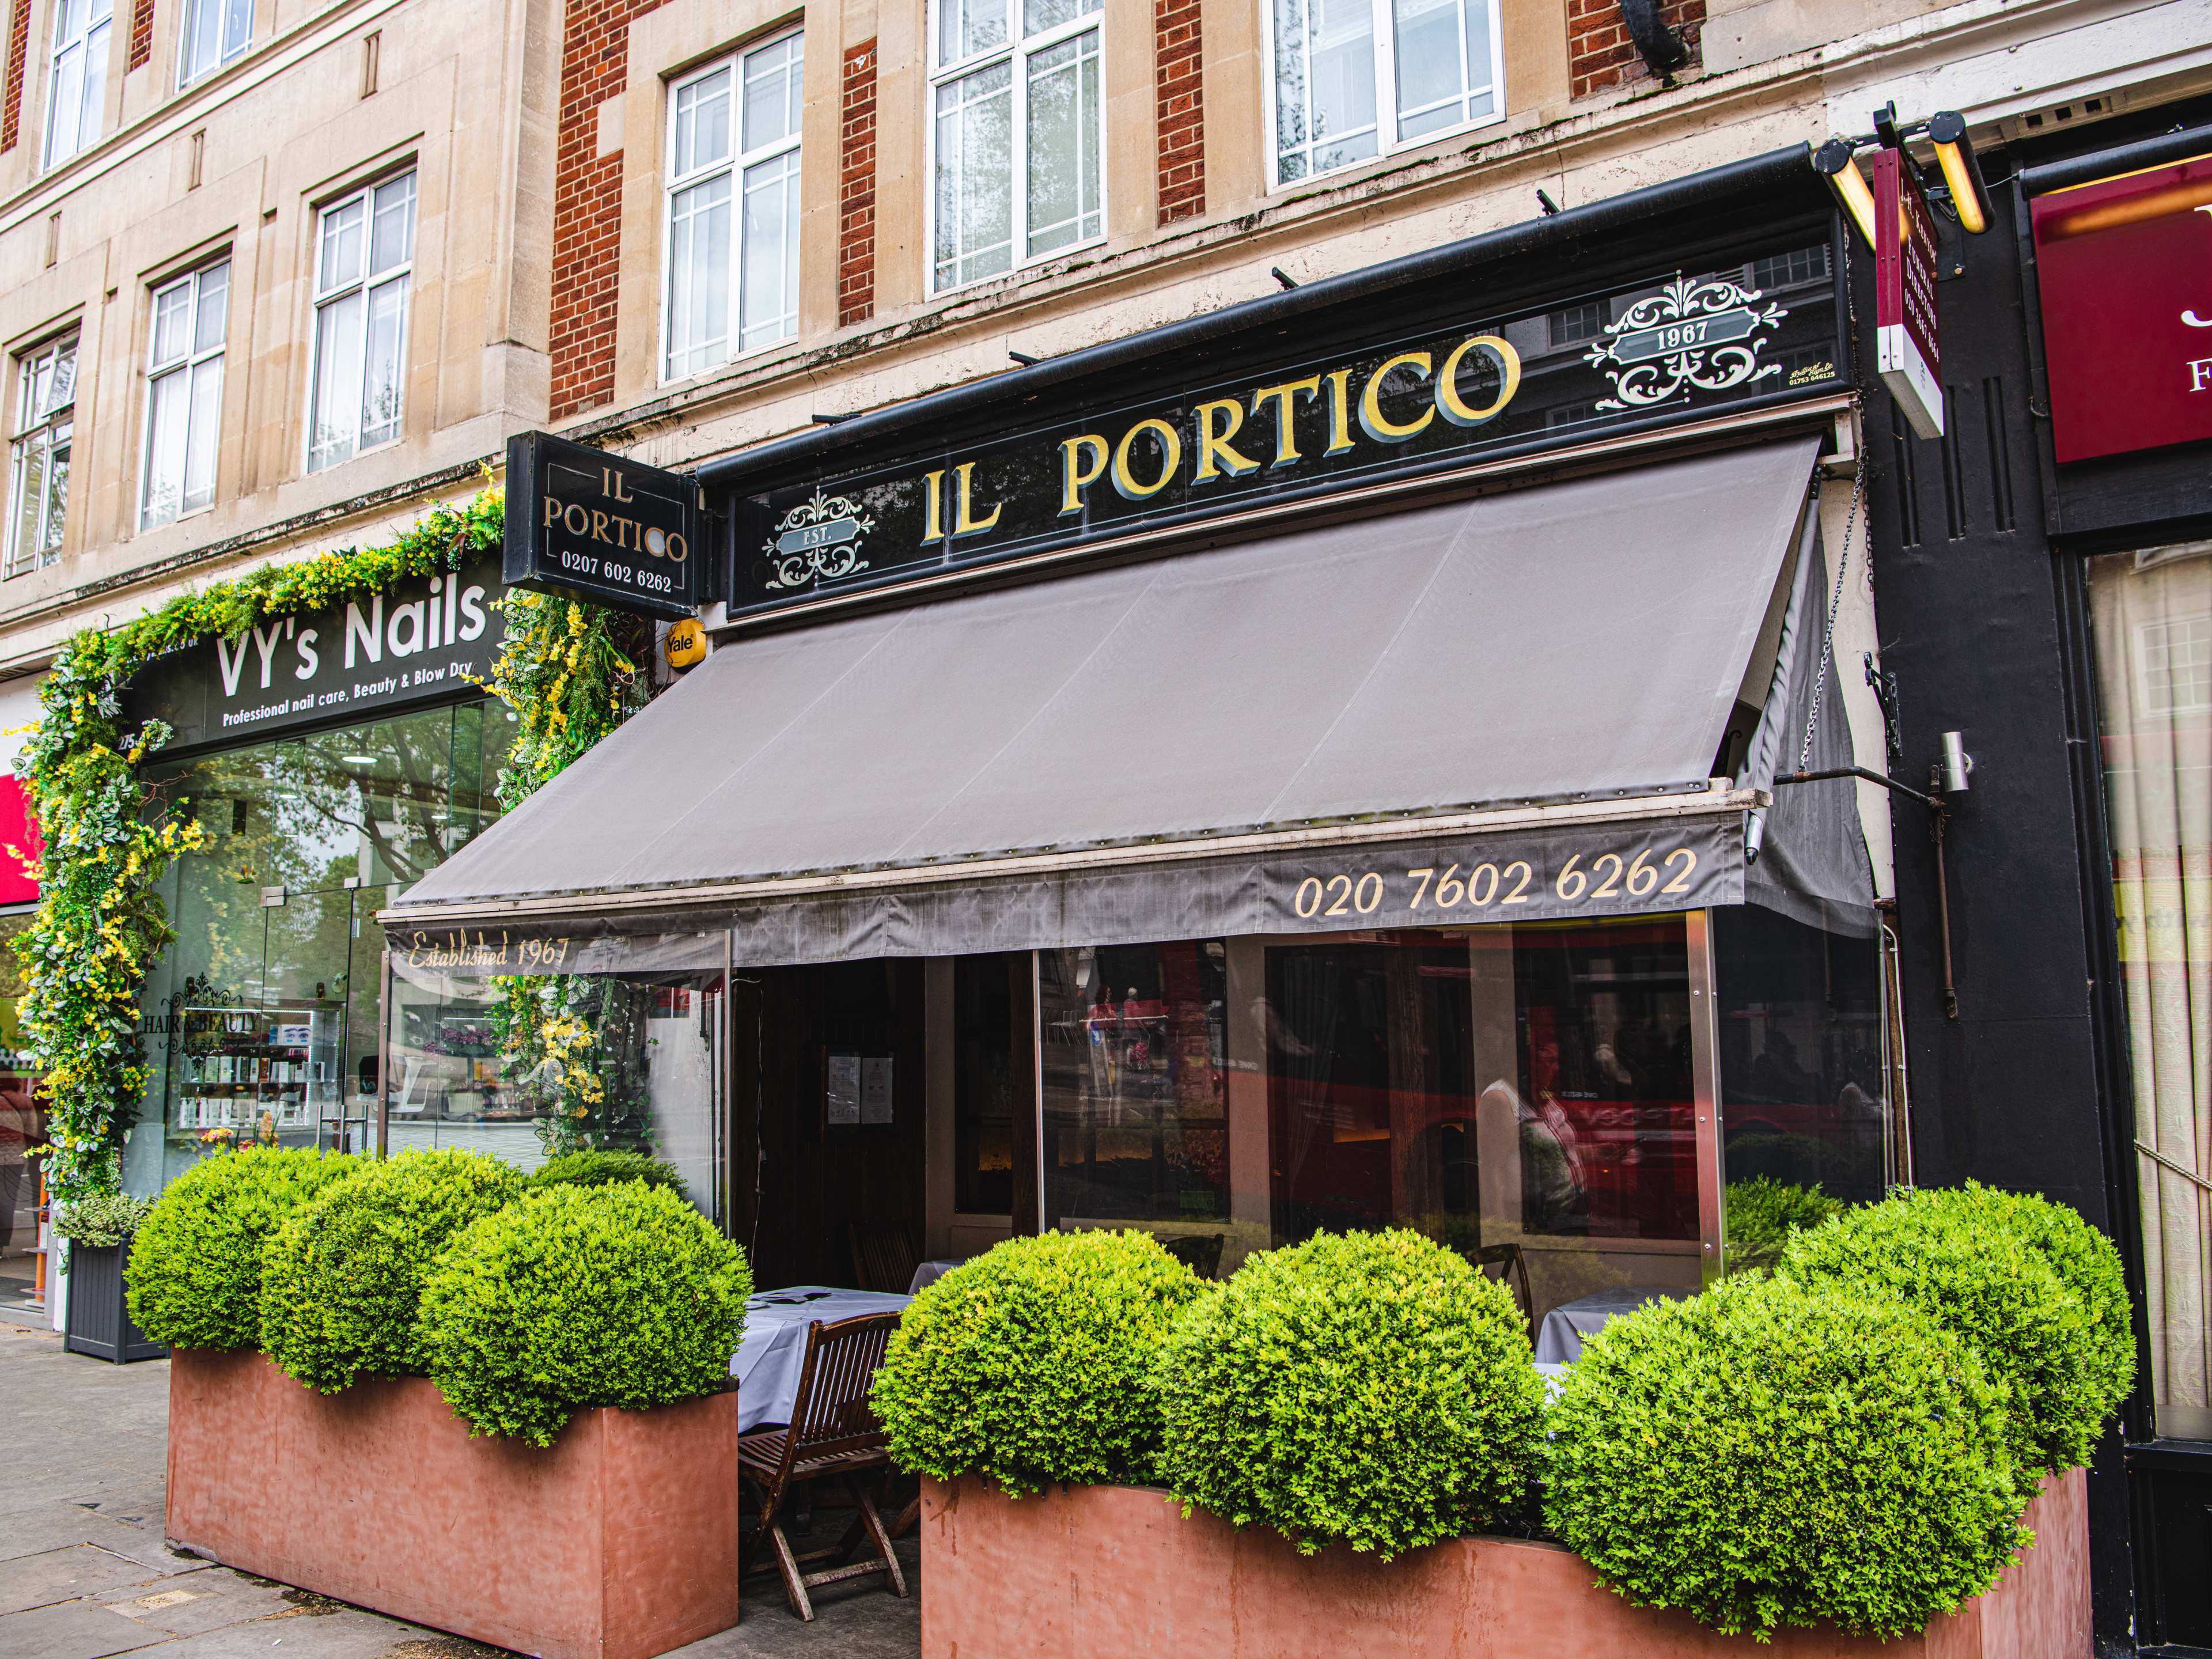 The exterior of Il Portico. There are hedges surrounded a few outdoor tables.